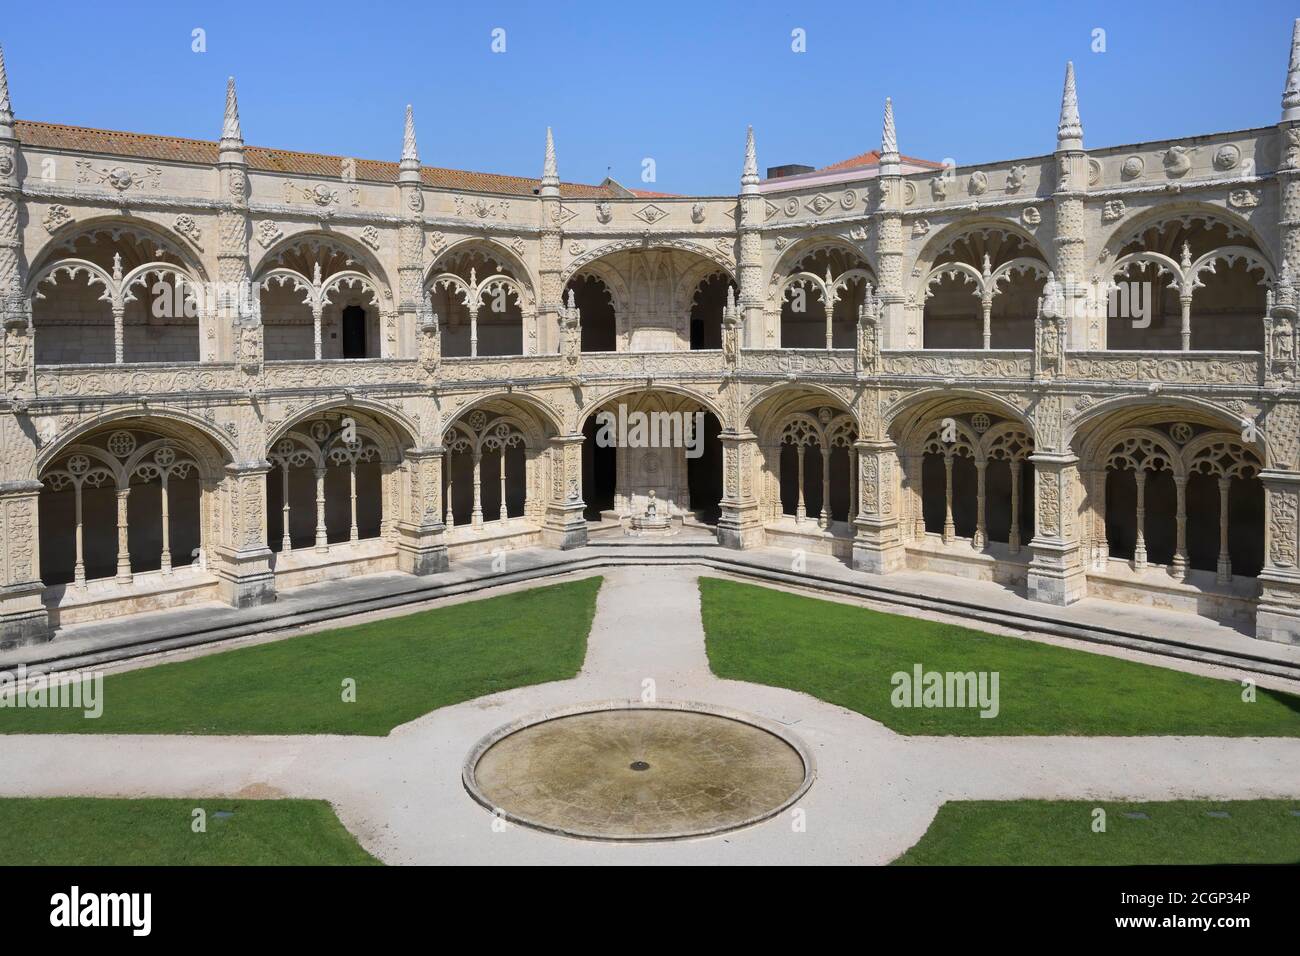 Courtyard in the Cloister, Monastery of the Hieronymites, Mosteiro dos Jeronimos, Belem, Lisbon, Portugal Stock Photo